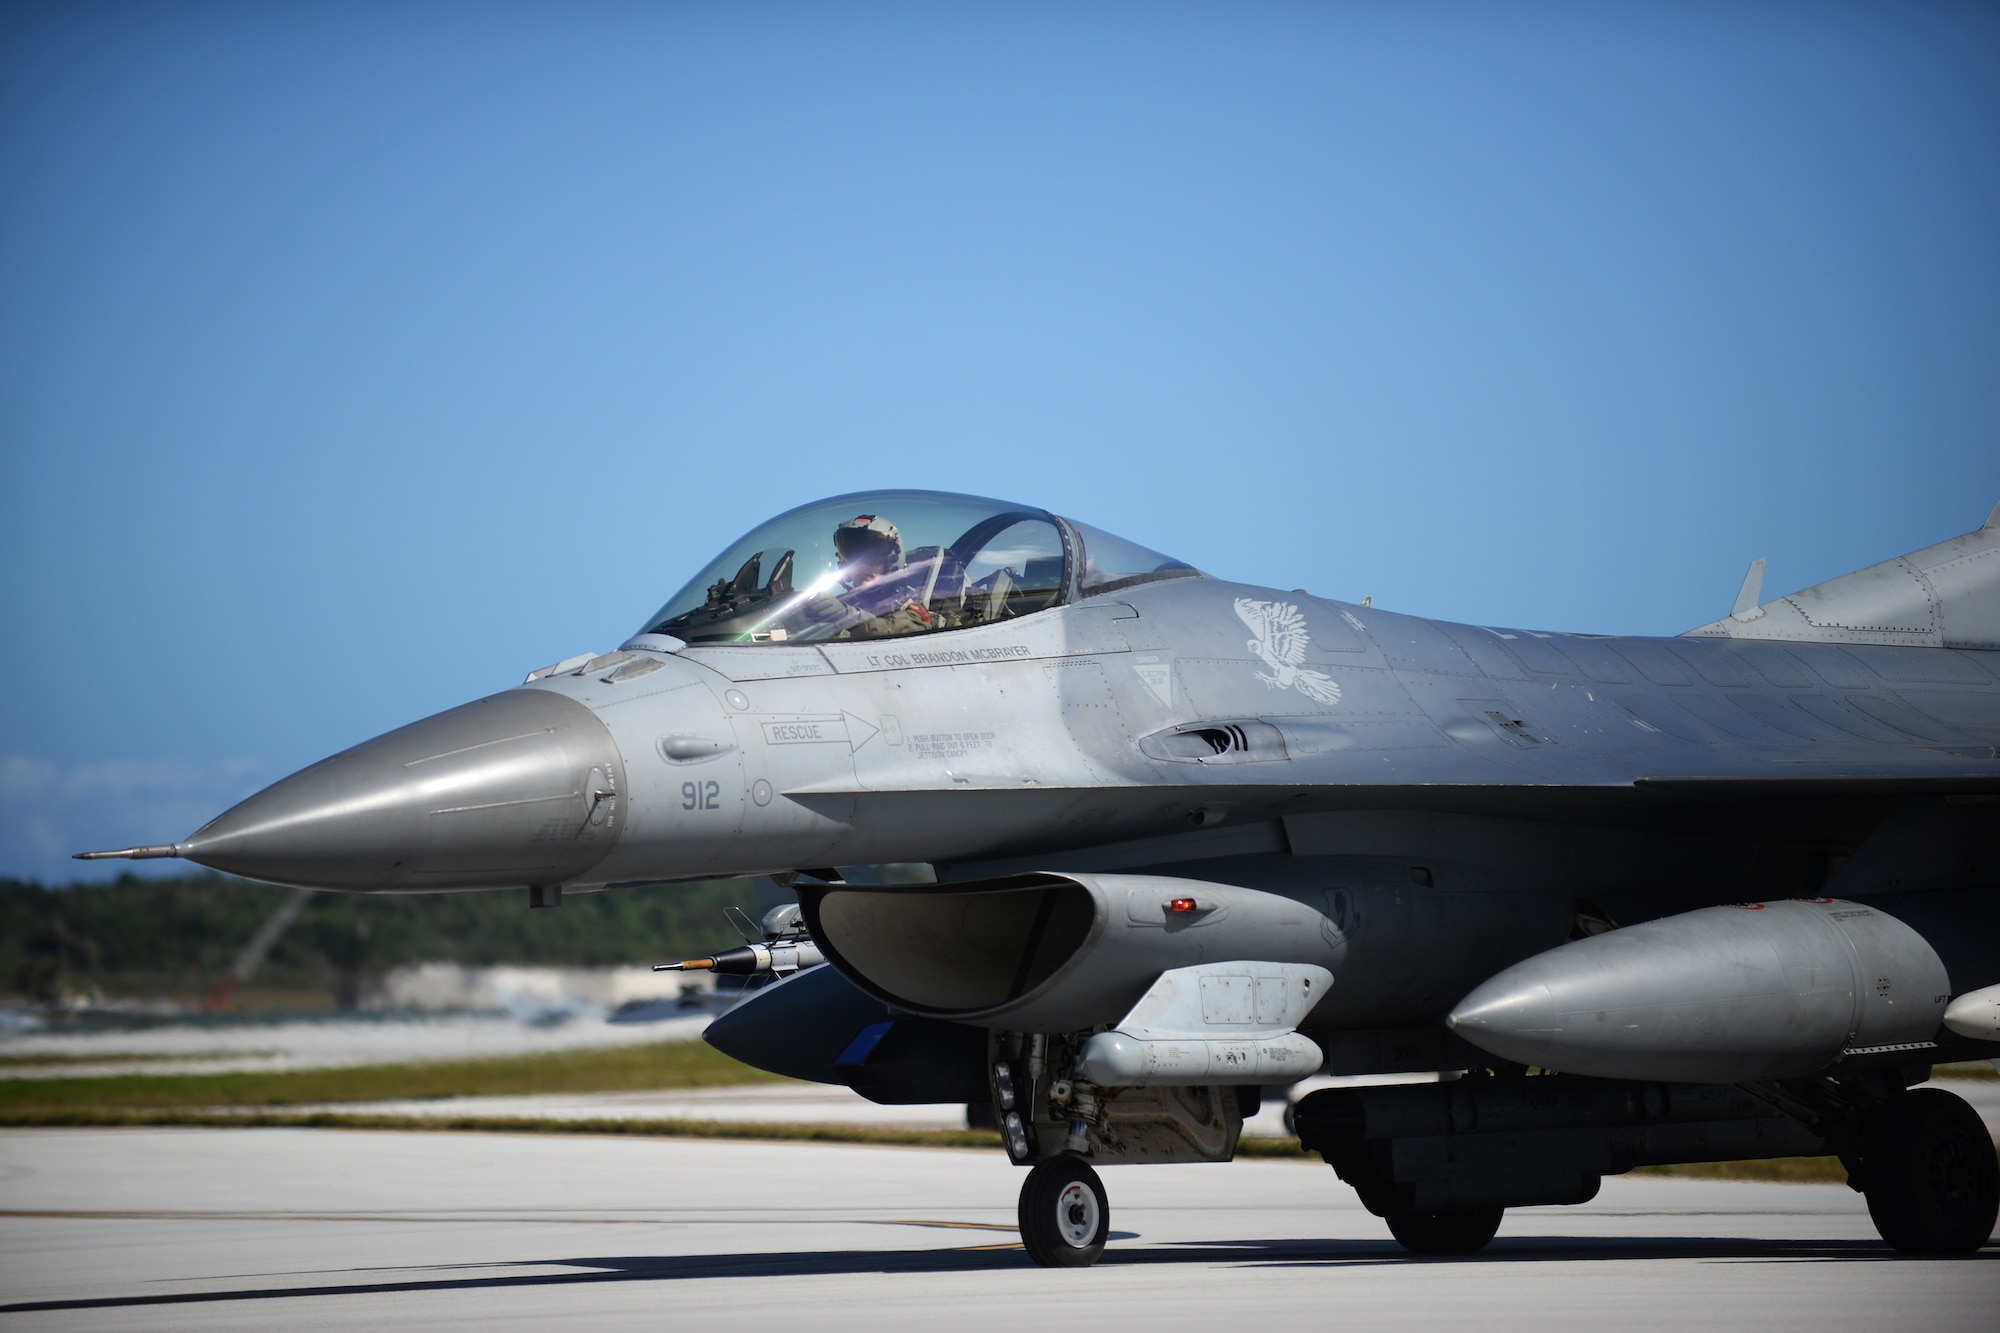 Capt. Philip Downing, a 13th Fighter Squadron pilot from Misawa Air Base, Japan, taxis an F-16 Fighting Falcon onto the runway Feb. 4, 2016, at Andersen Air Force Base, Guam.  Several F-16s from the 13th FS are deployed to Andersen AFB in support of Cope North 2016. Cope North is an annual event that focuses on humanitarian assistance and disaster relief and large force employment in an effort to enhance interoperability among forces from the U.S., Japan, Australia, South Korea, Philippines and New Zealand. (U.S. Air Force photo/Senior Airman Joshua Smoot)